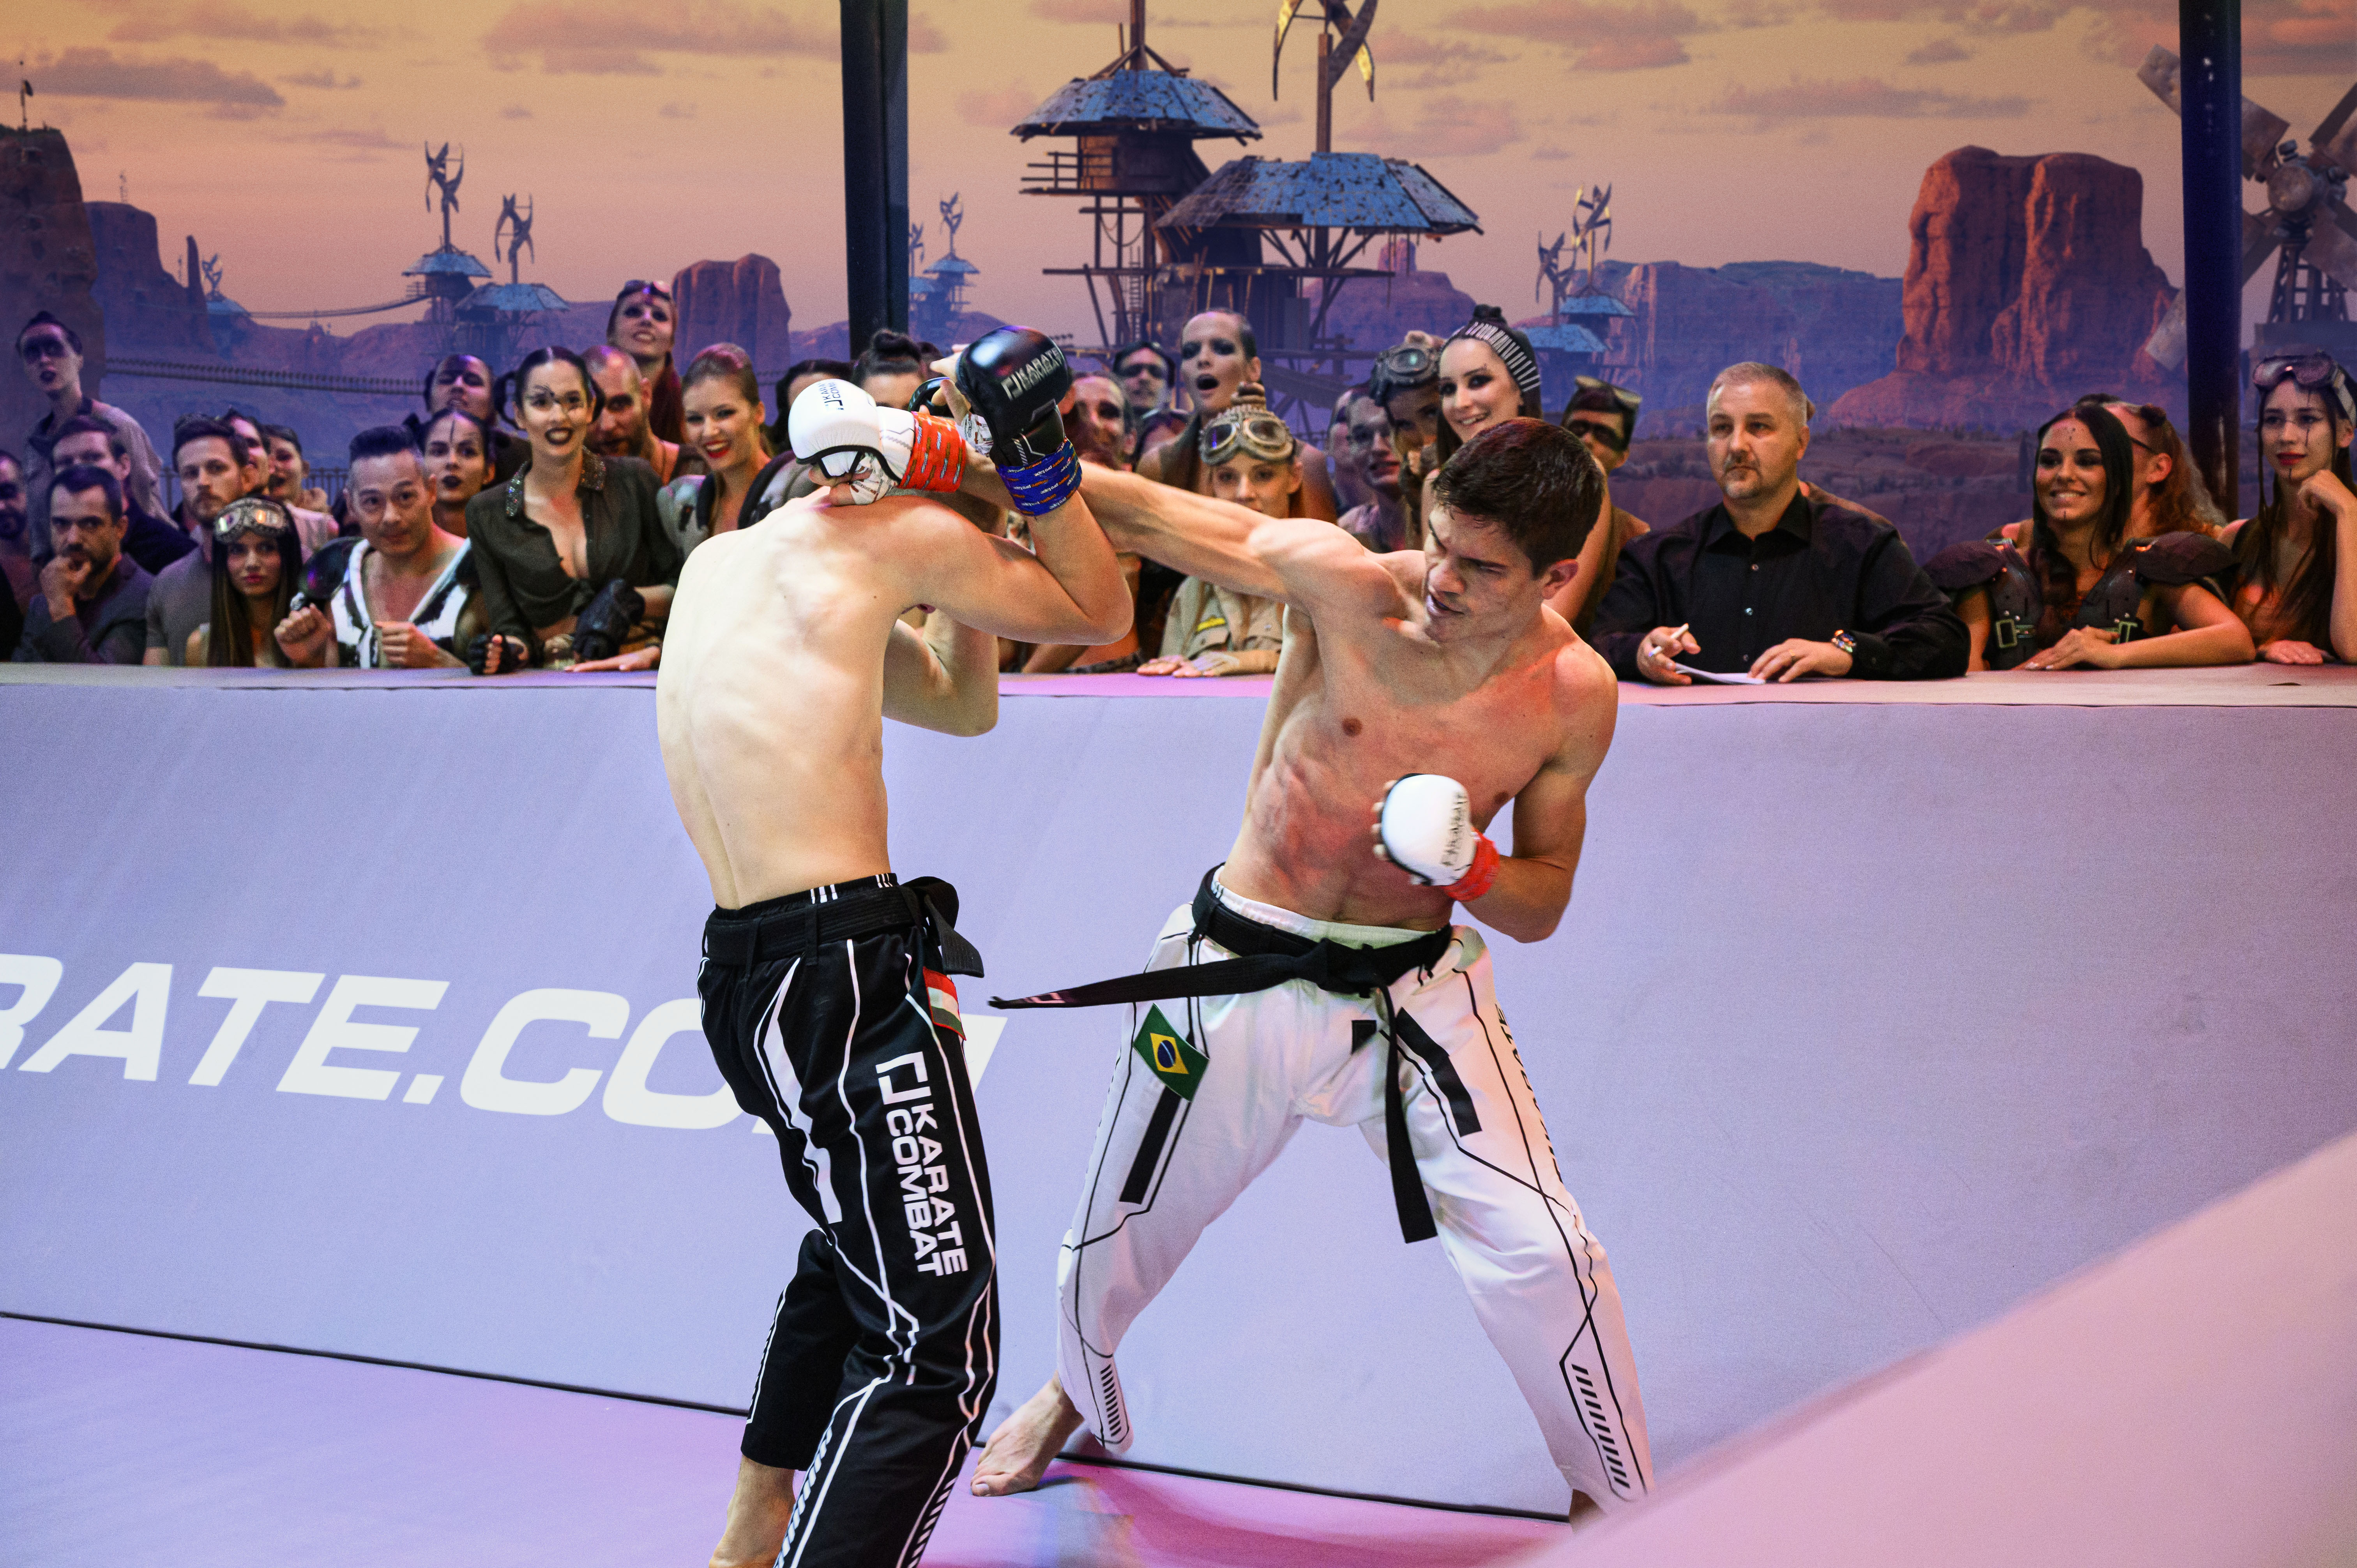 GOL is bringing Karate Combat to Spain! Every Sunday night the world's top athletes, including Spanish champions, will compete full contact in the Fighting Pit, set in a virtual world created by Epic Games' Unreal Engine. Watch on GOL and find out more about Karate Combat at karate.com.